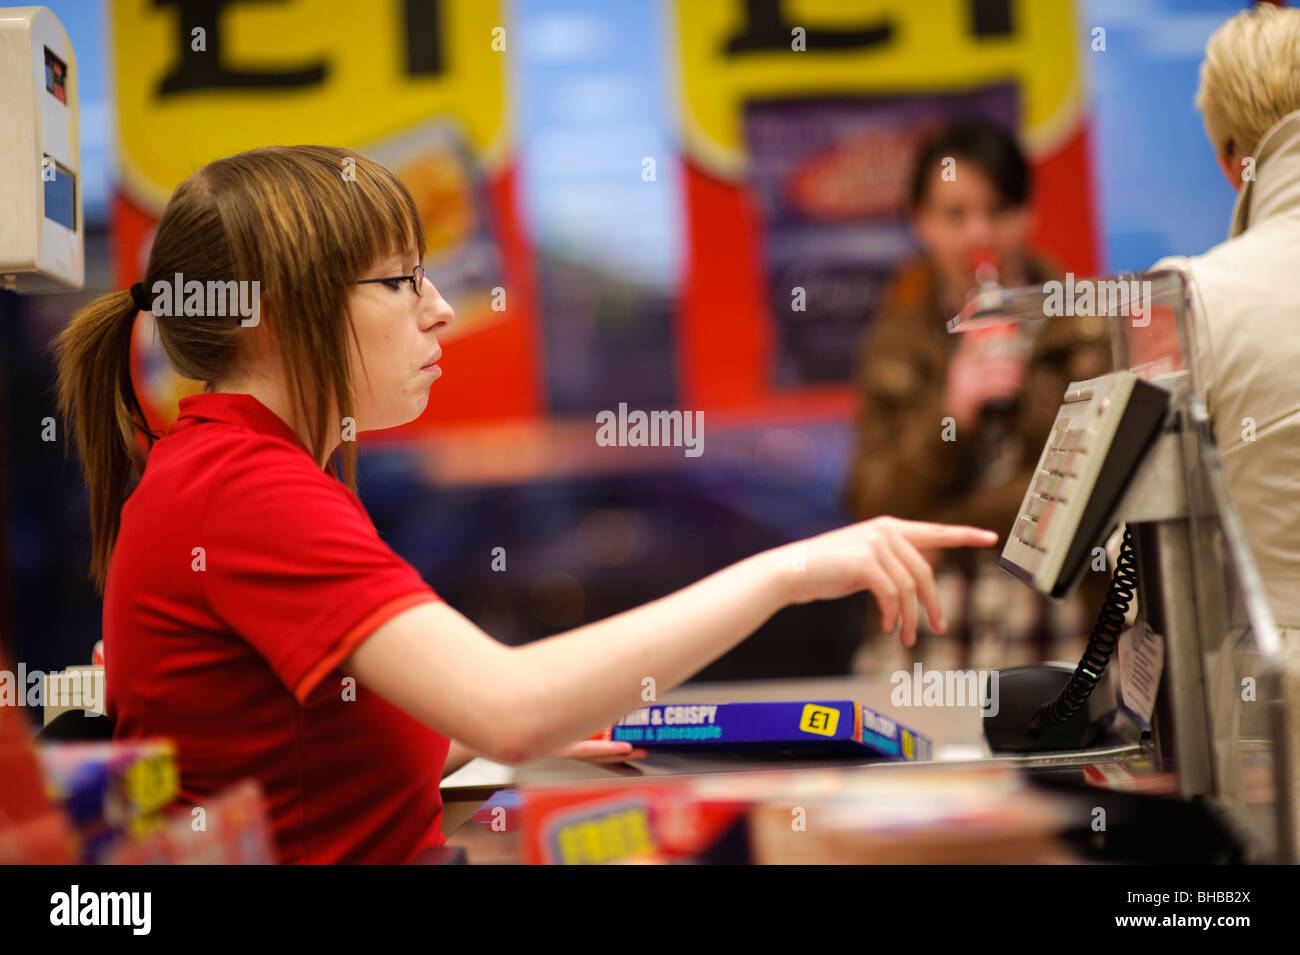 a Young girl woman cashier working at Iceland frozen food supermarket checkout till, UK Stock Photo